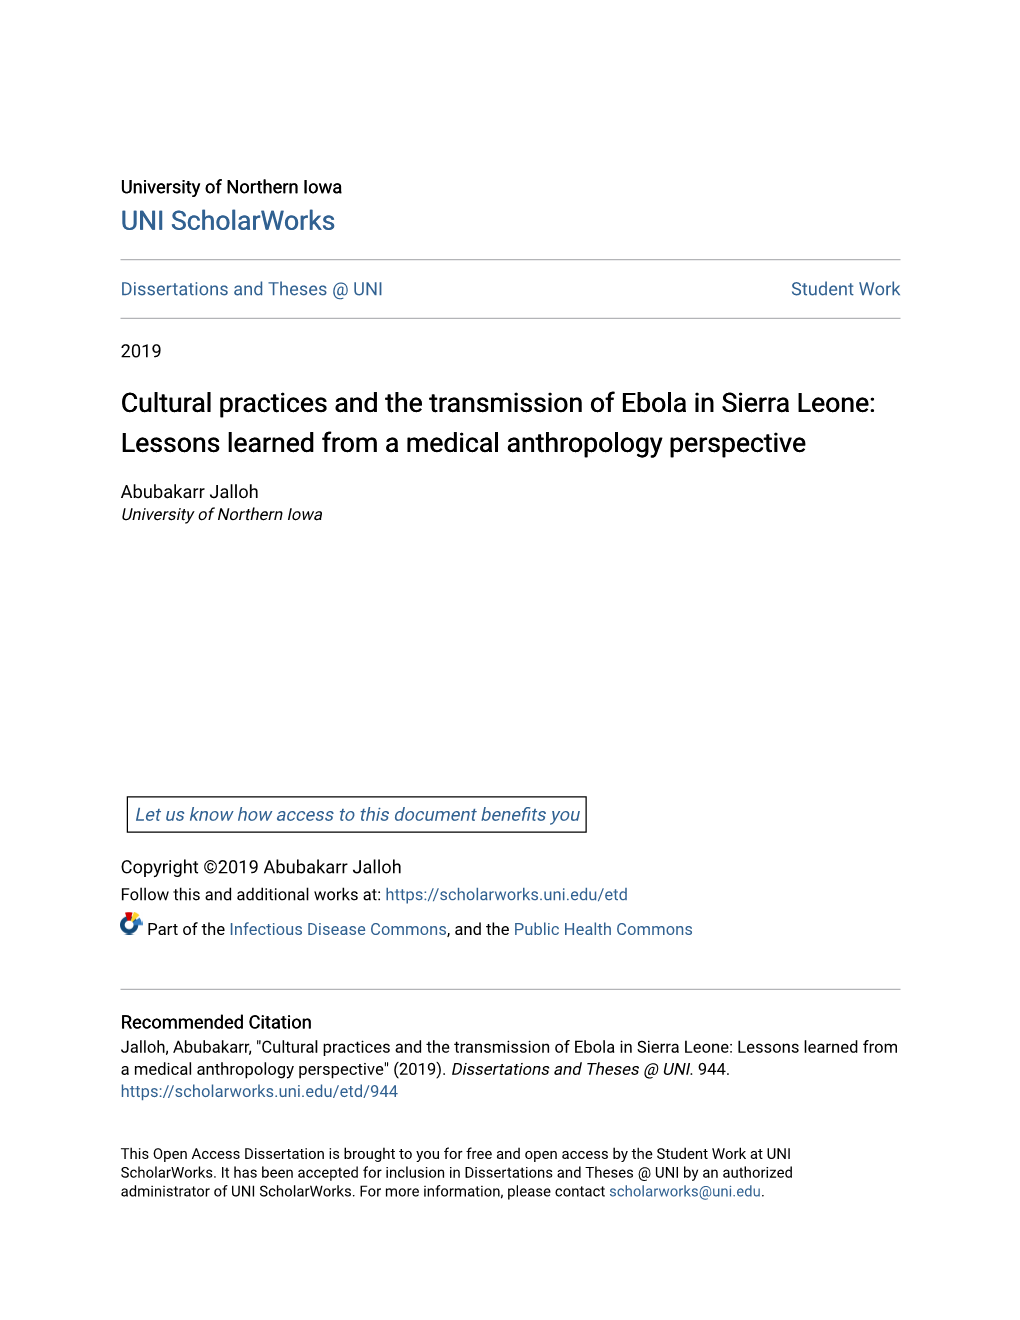 Cultural Practices and the Transmission of Ebola in Sierra Leone: Lessons Learned from a Medical Anthropology Perspective